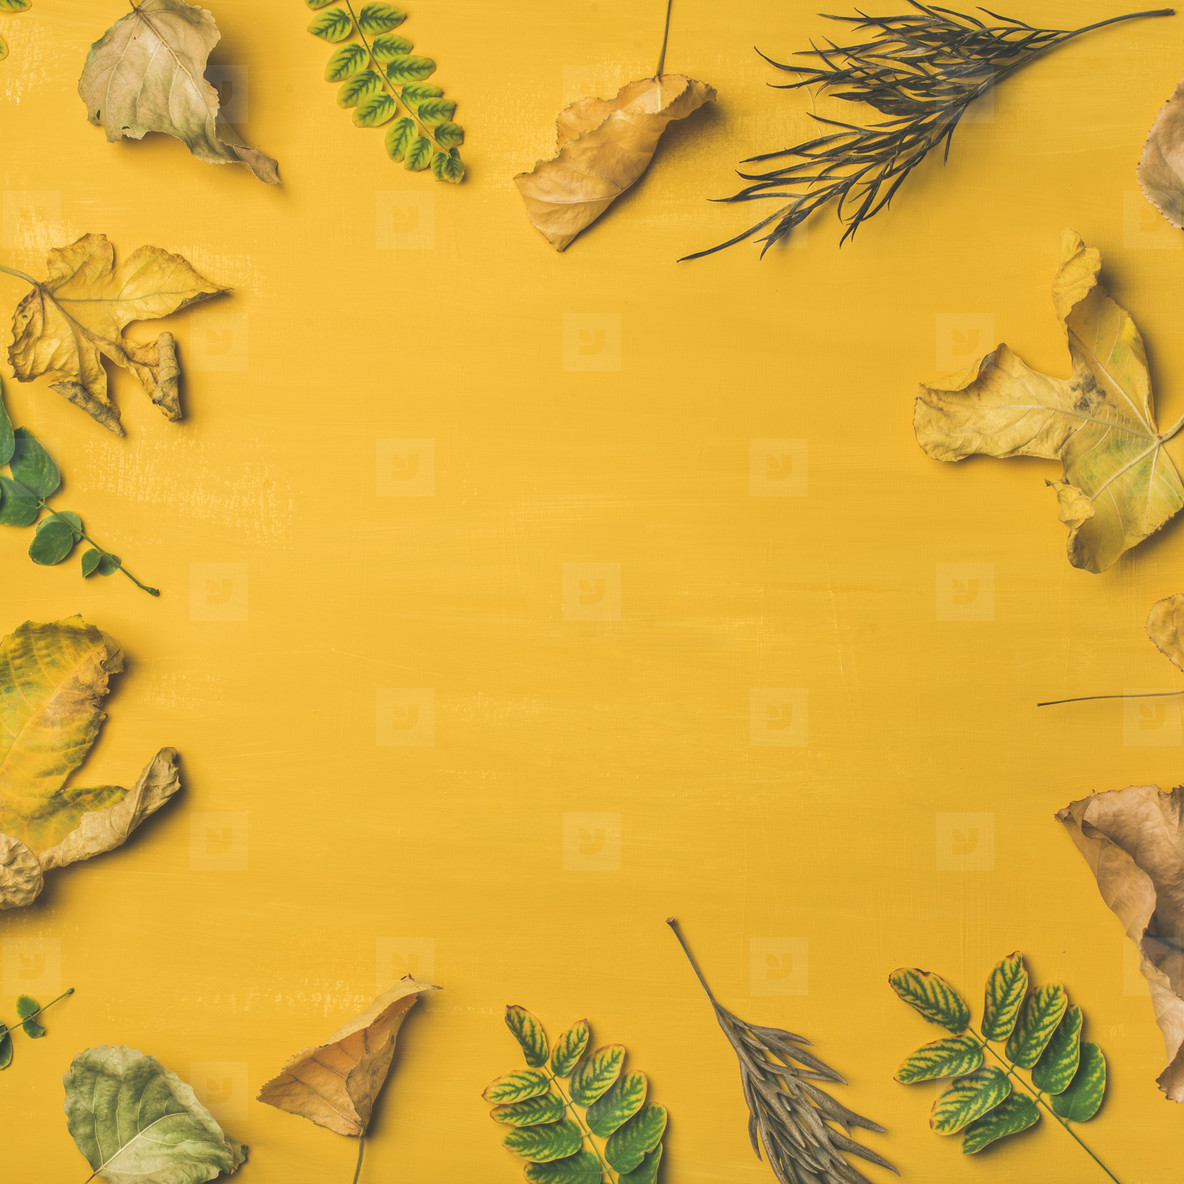 Autumn or Fall pattern, background and texture over yellow background stock  photo (133775) - YouWorkForThem